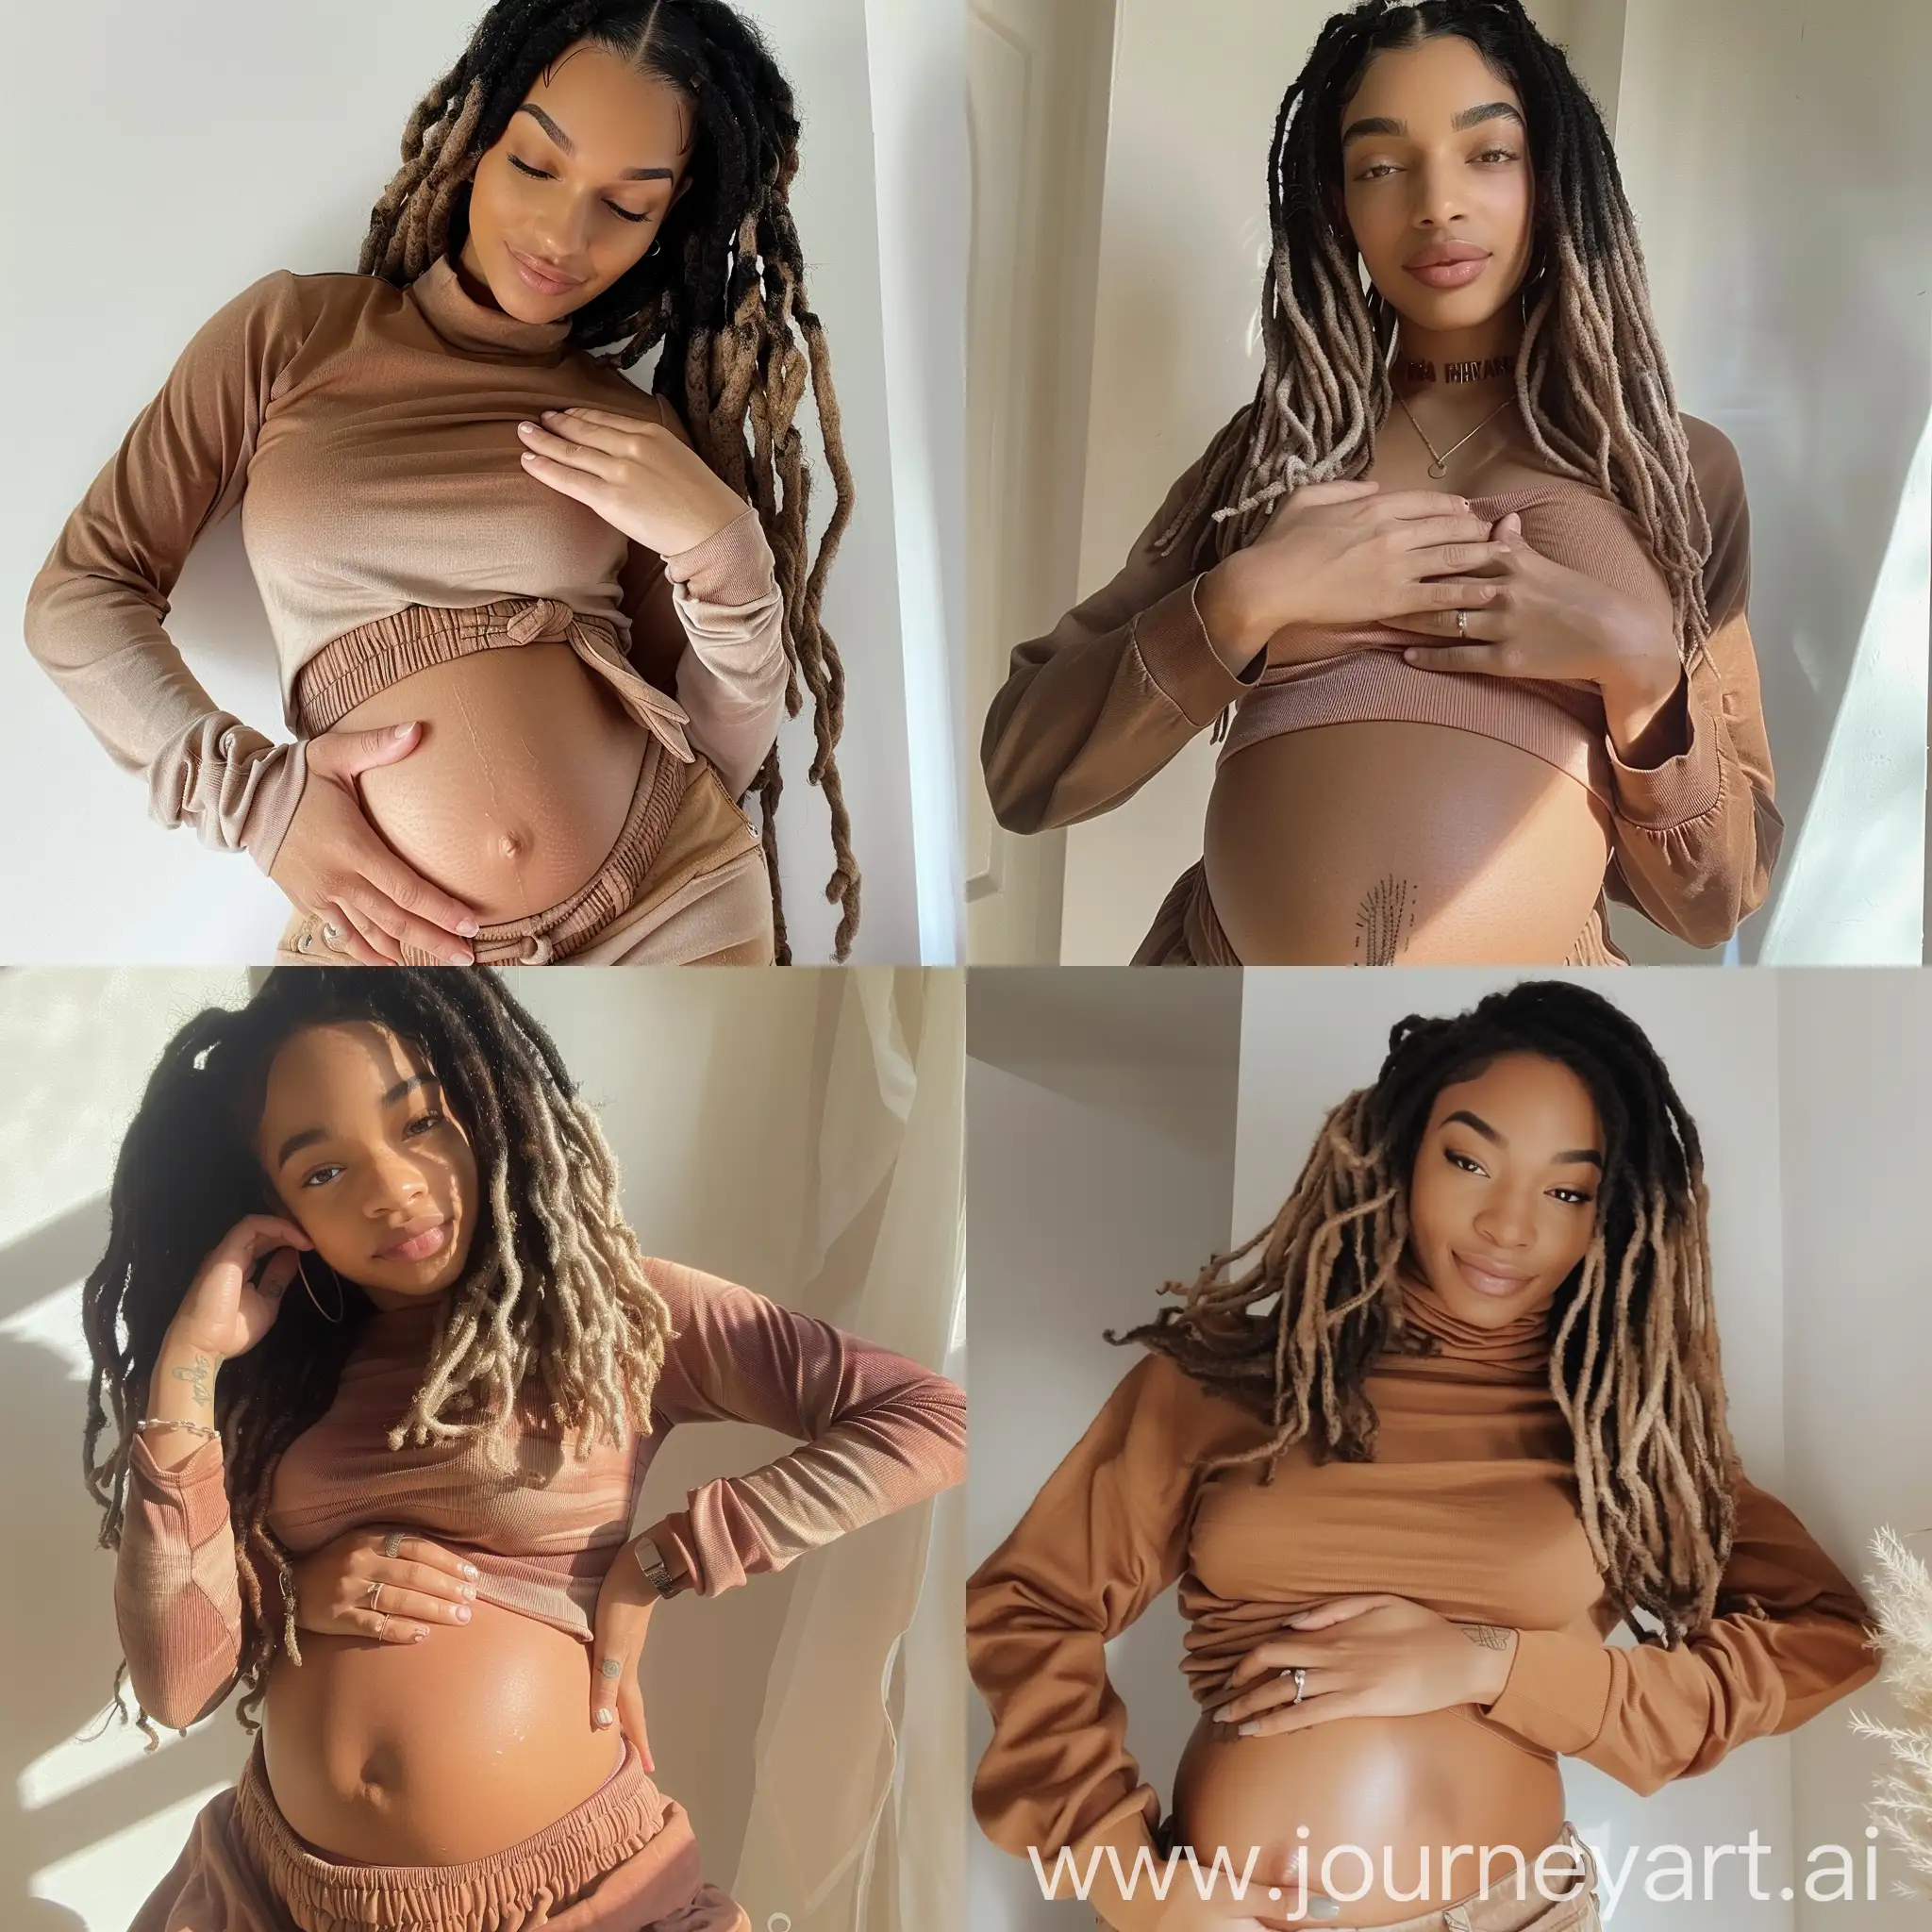 Stylish-Selfie-of-Young-Black-Influencer-with-Ombre-Dreadlocks